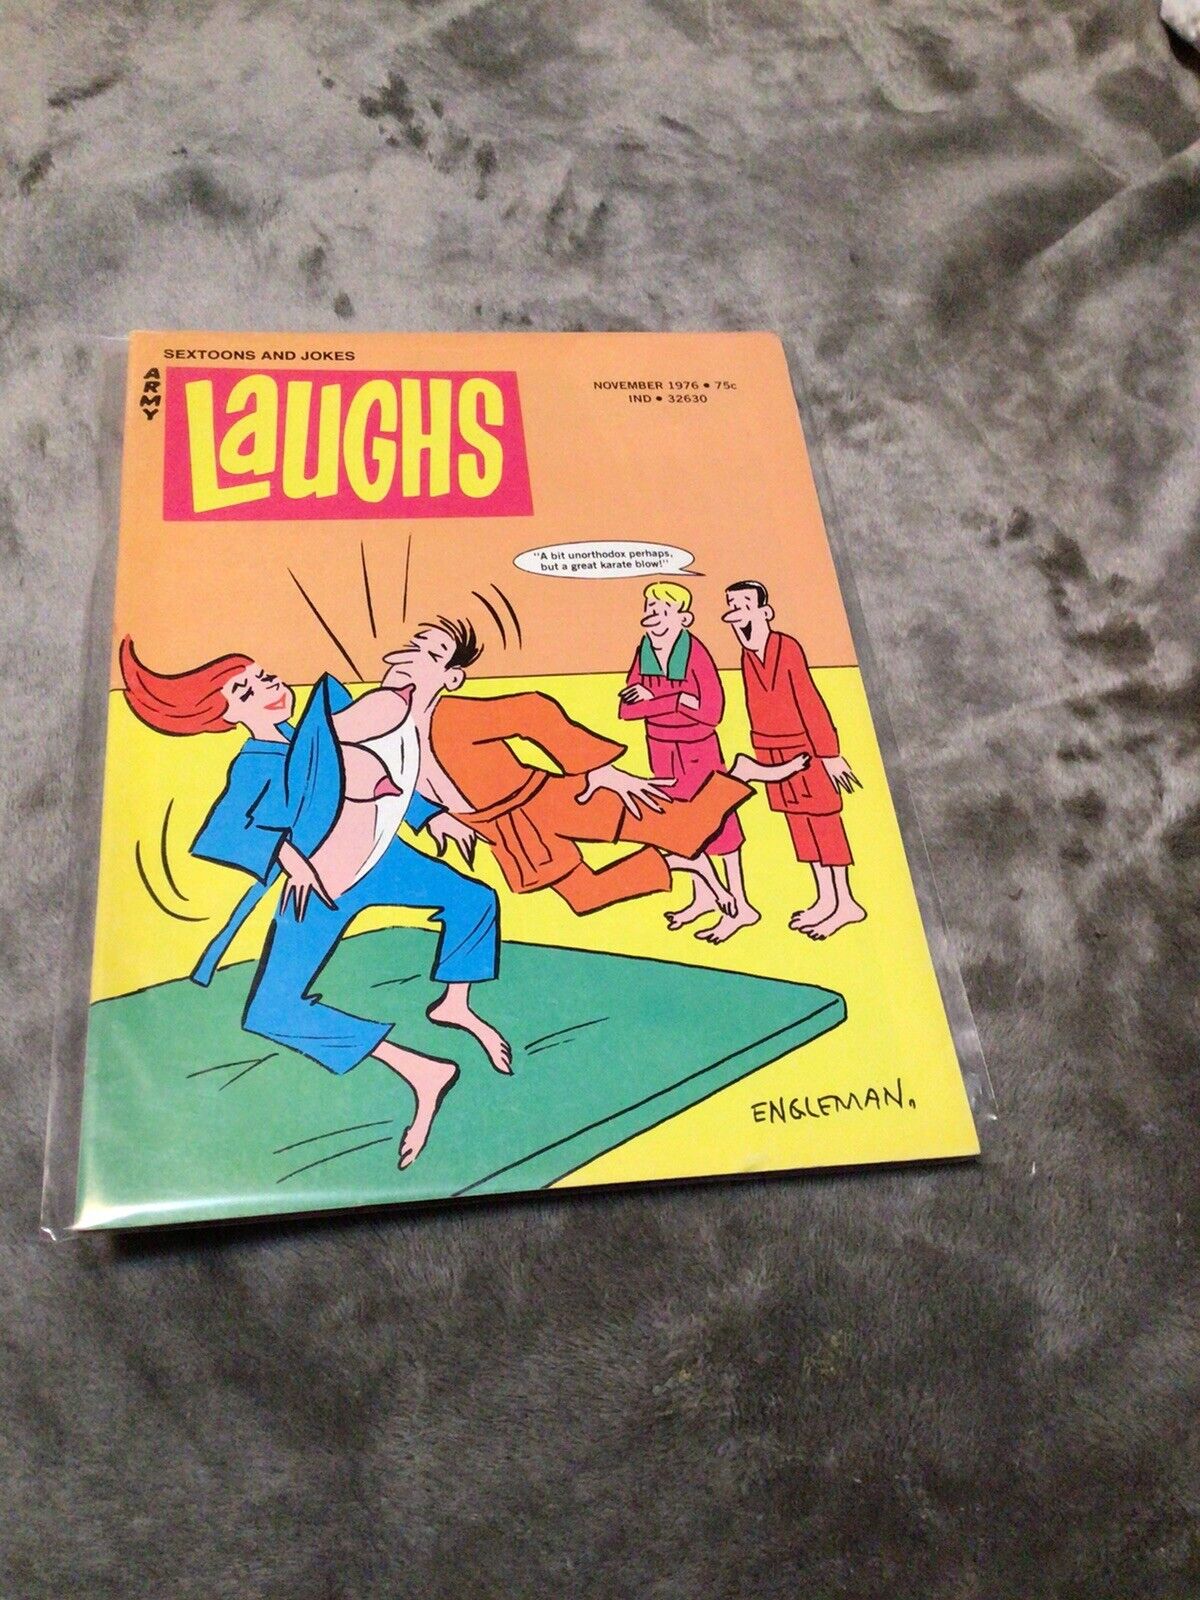 Vintage Army Laughs Sextons And Jokes Adult Humor Comic Book November 1976